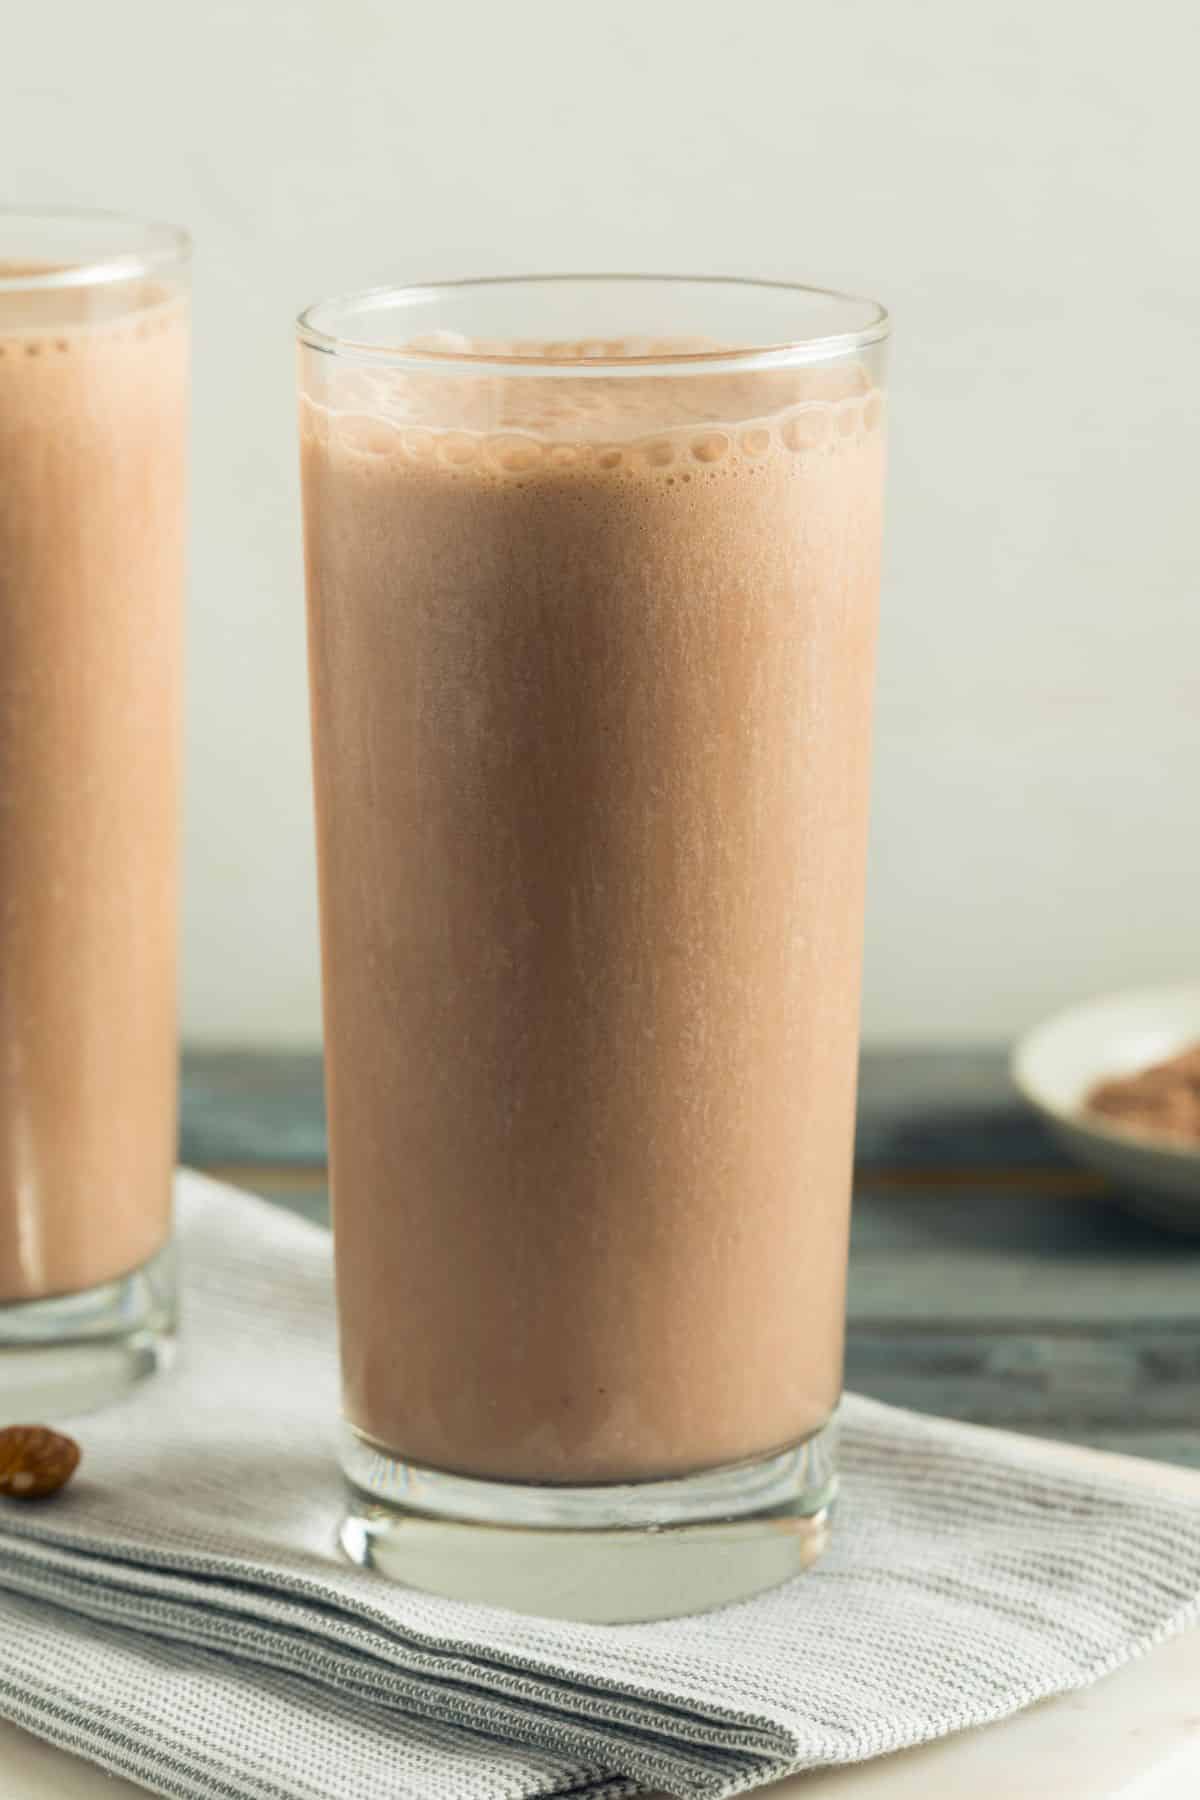 a chocolate shake in a glass.